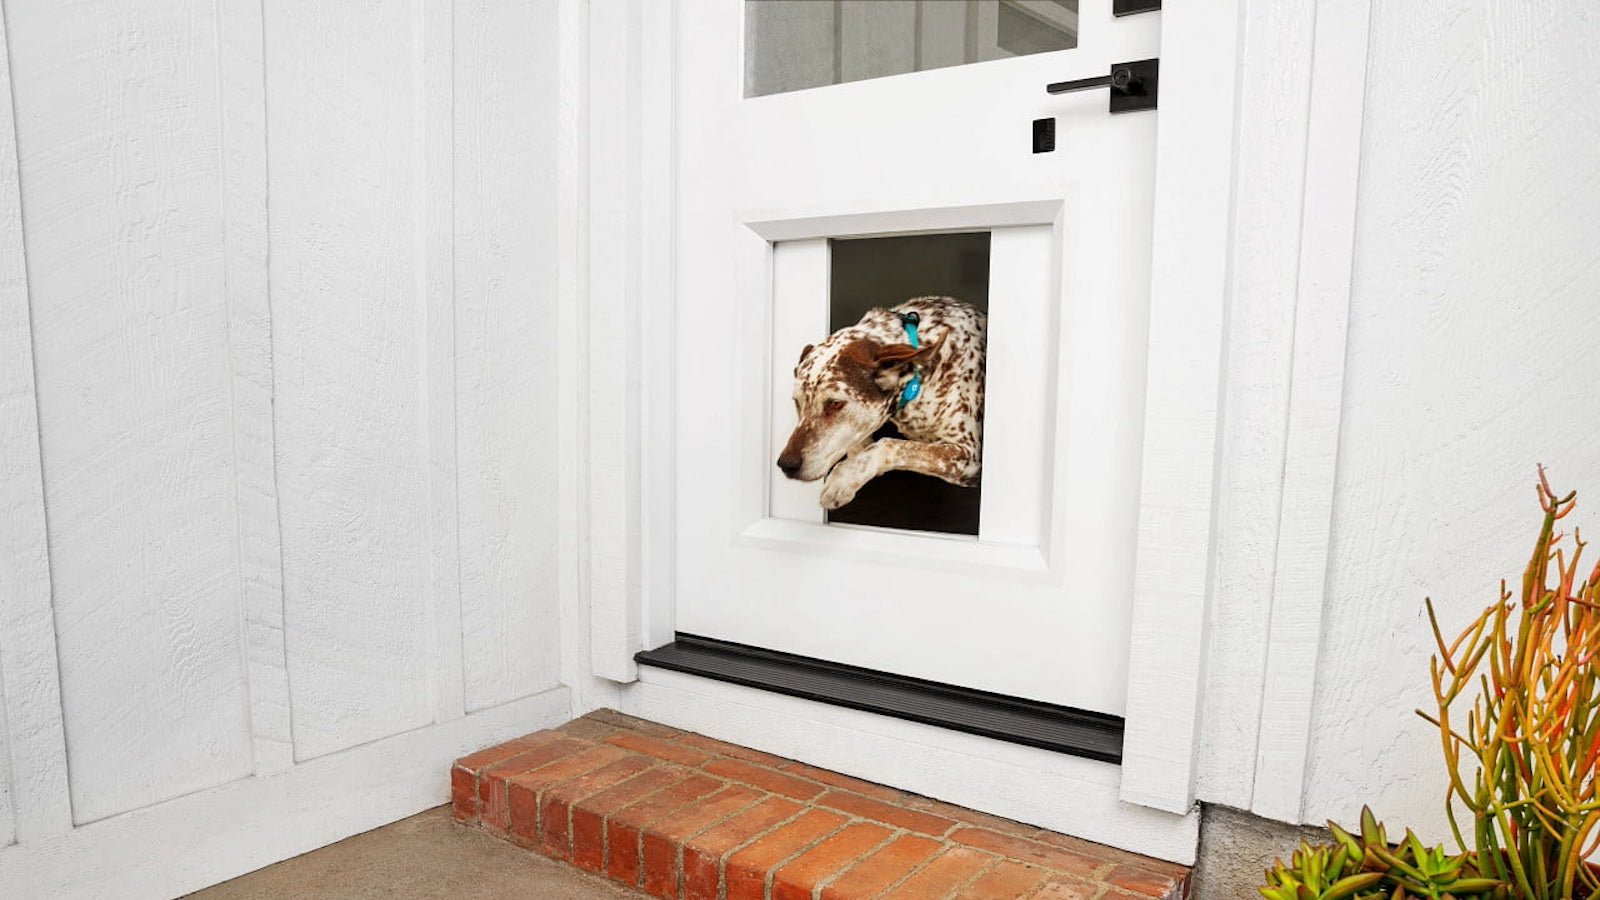 myQ Pet Portal smart dog door lets your pup go outside whenever you want